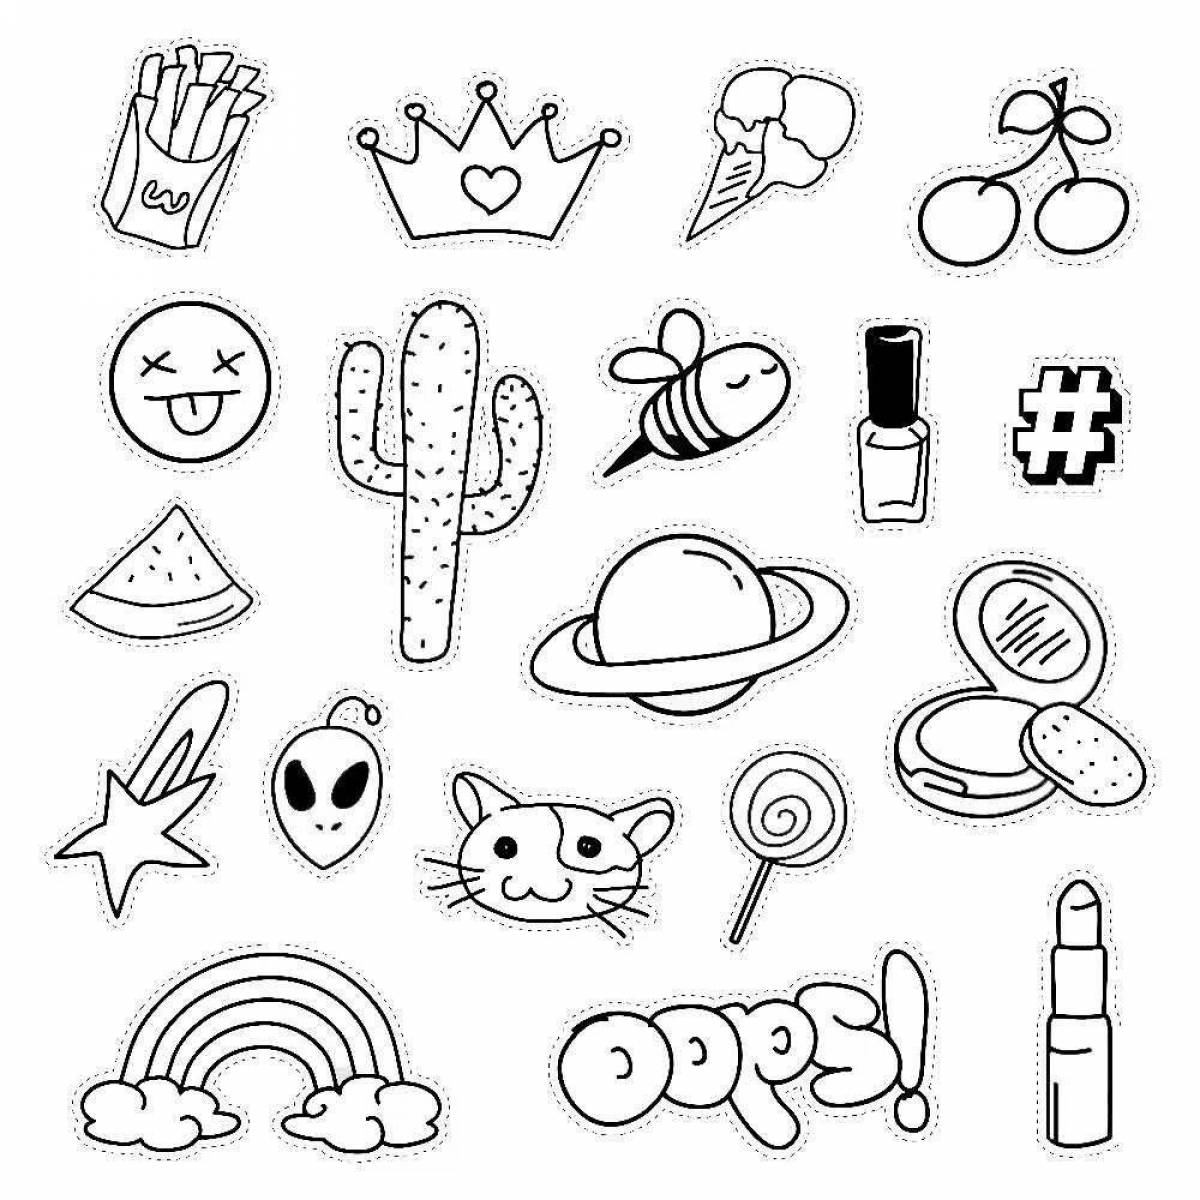 Coloring page of homemade stickers in abundance of colors